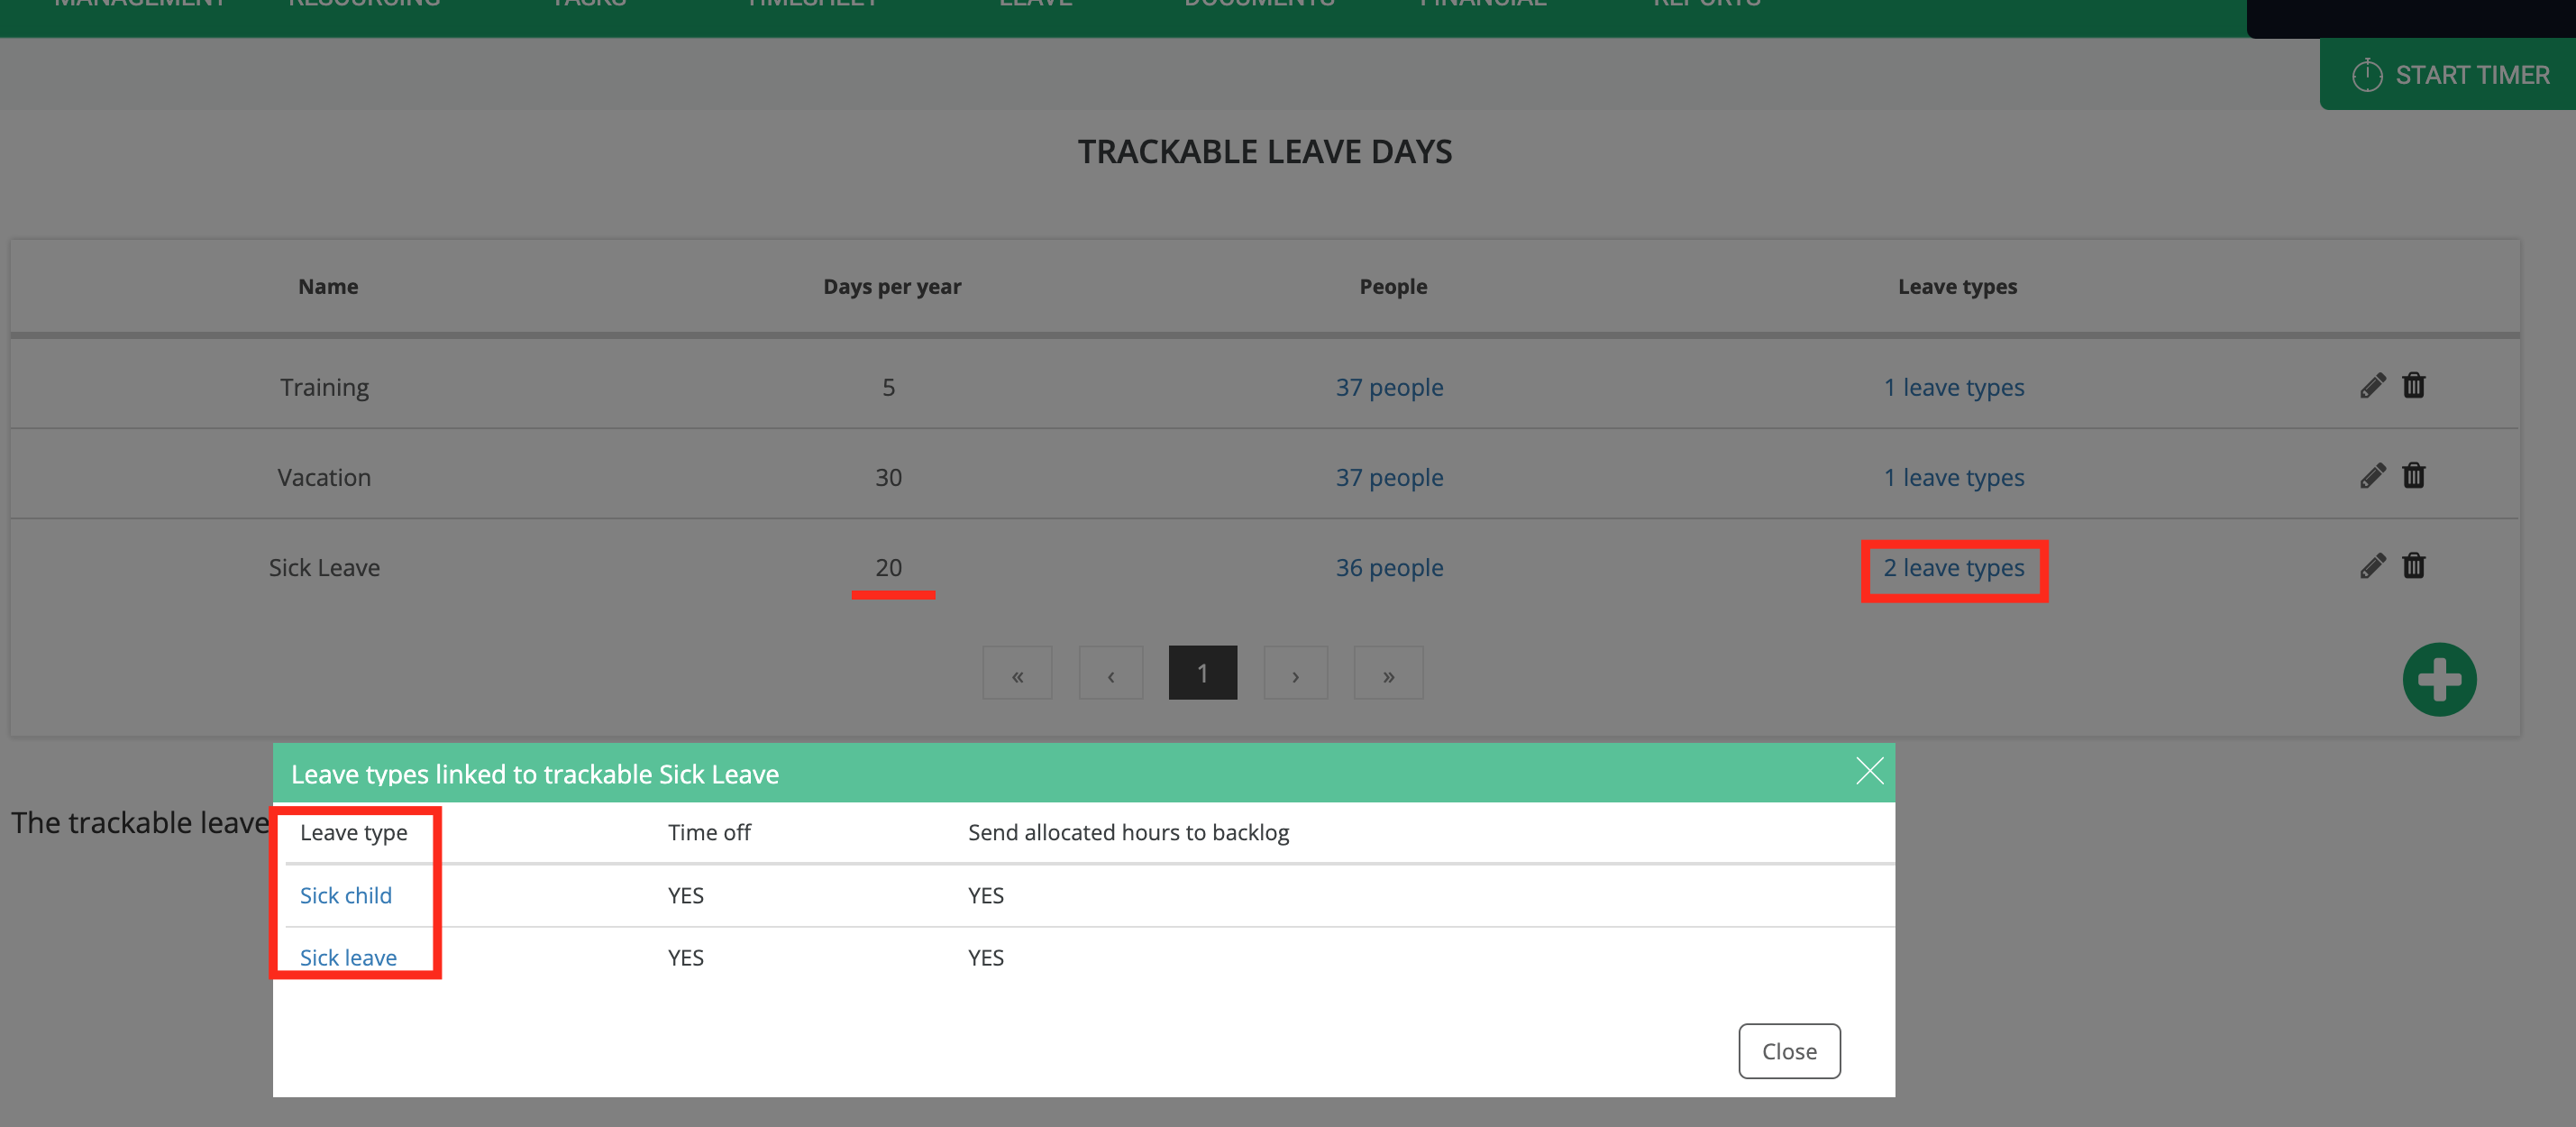 More leave types in Trackable leave